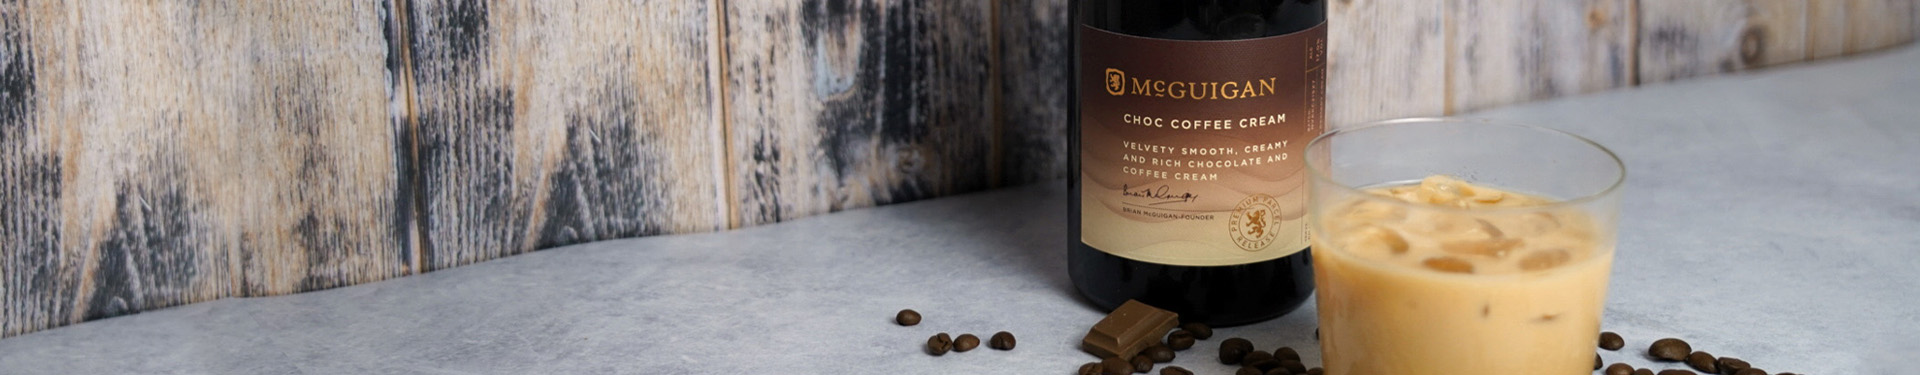 Bottle of and glass of McGuigan Choco Coffee Cream against a wooden wall